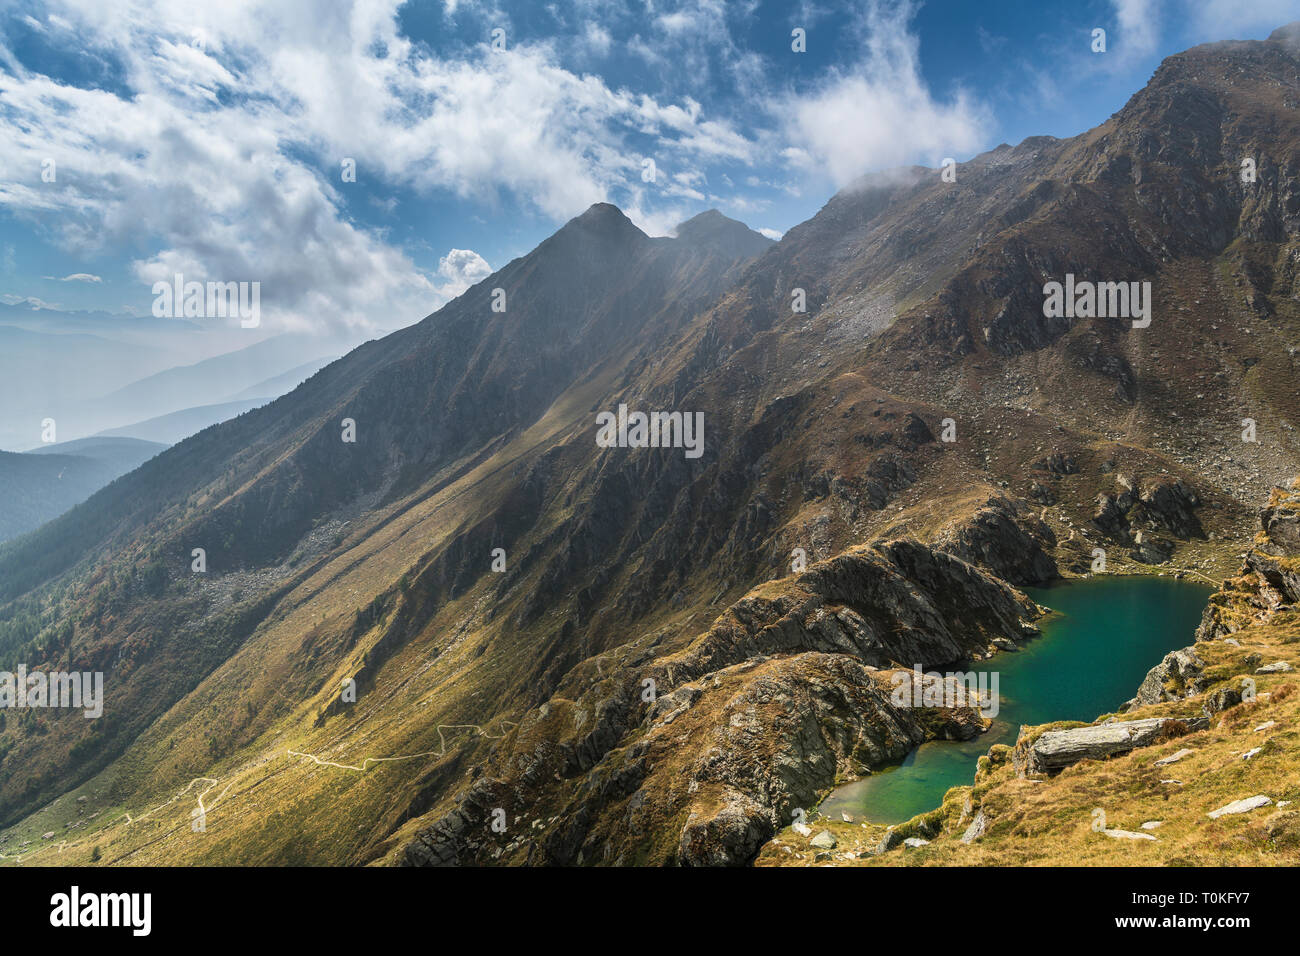 Hike to Seefeldspitze, view to Seefeldsee, Valser Tal, Pfunderer Berge, South Tyrol, Italy Stock Photo